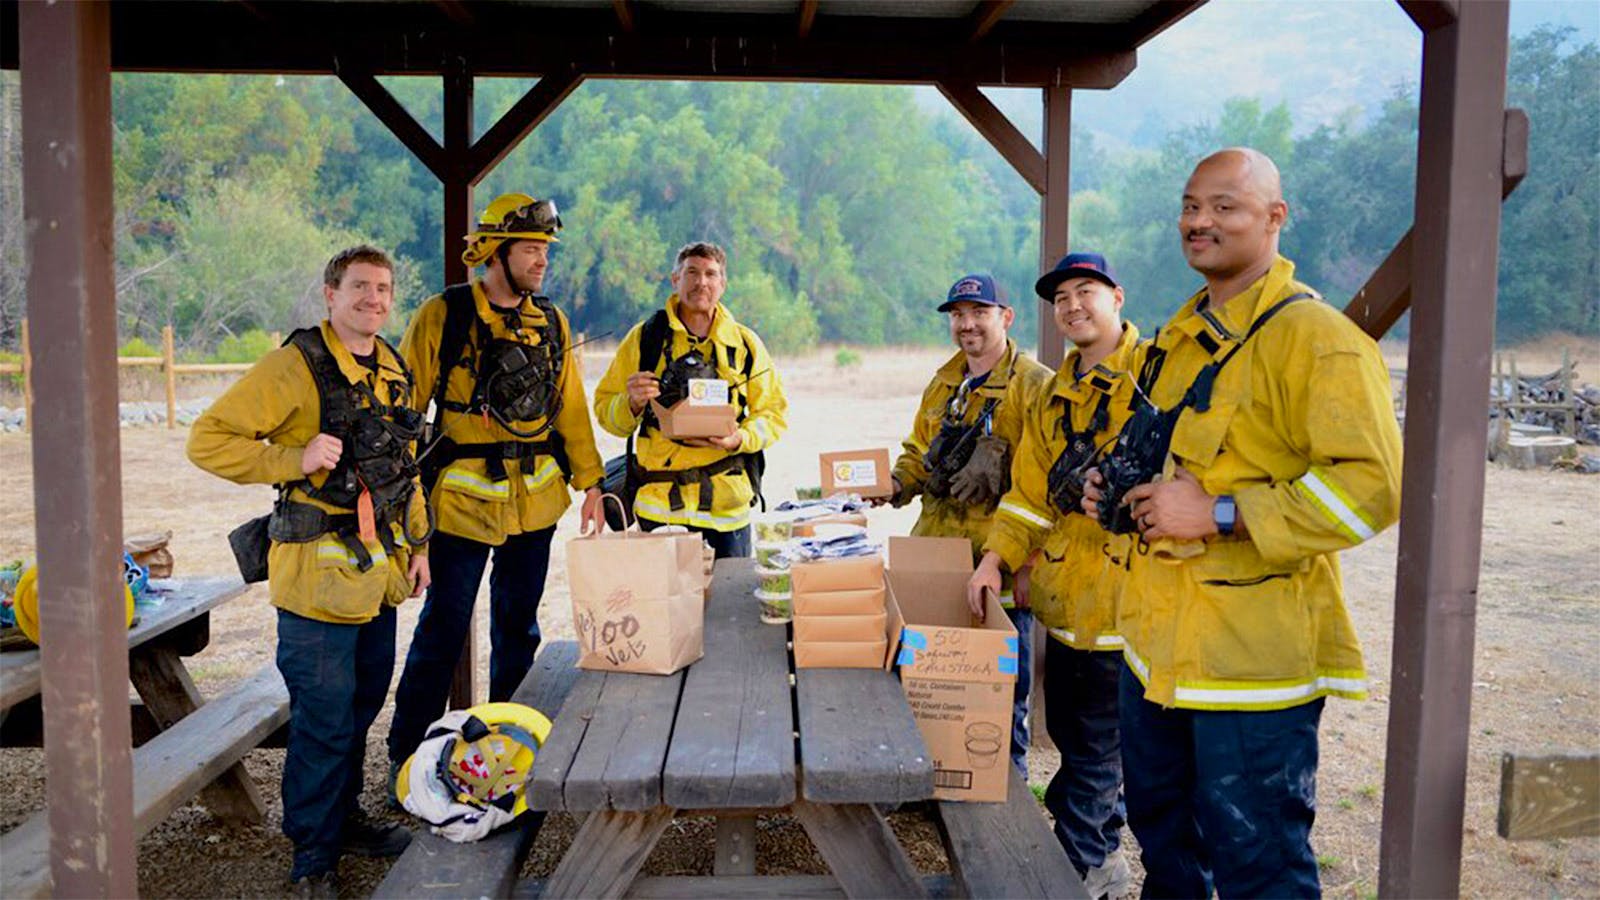 Wineries and Chefs Gear Up Charity Efforts for California Wildfire Relief